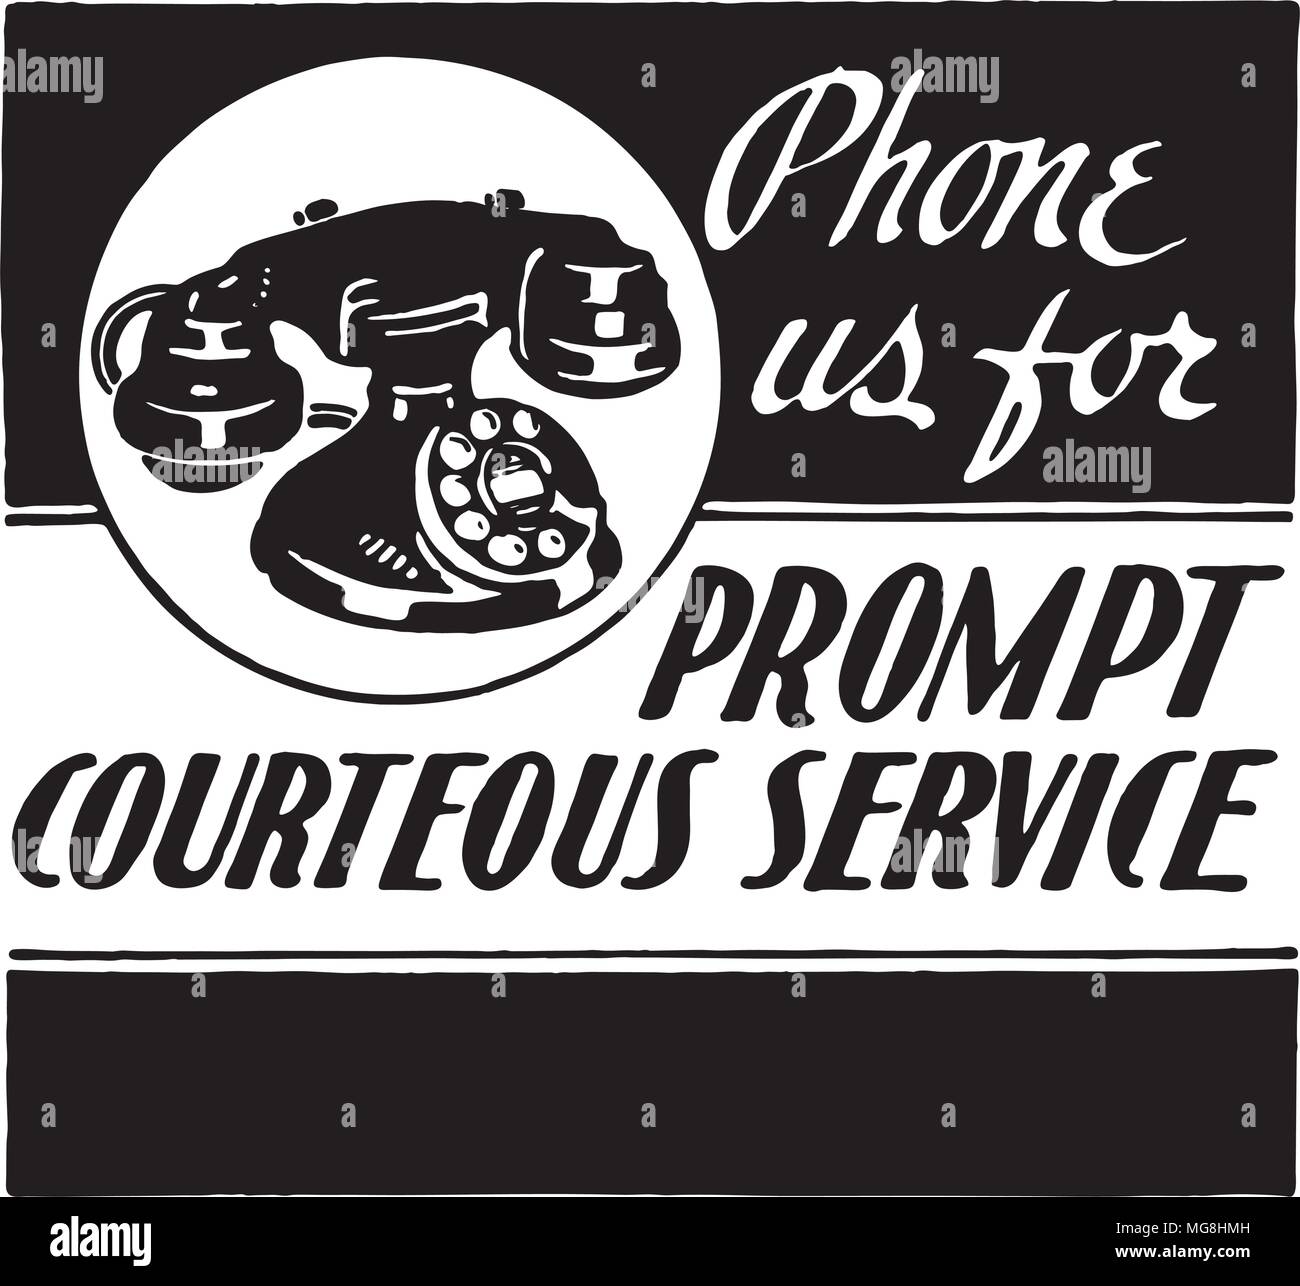 Phone Us For Courteous Service - Retro Ad Art Banner Stock Vector